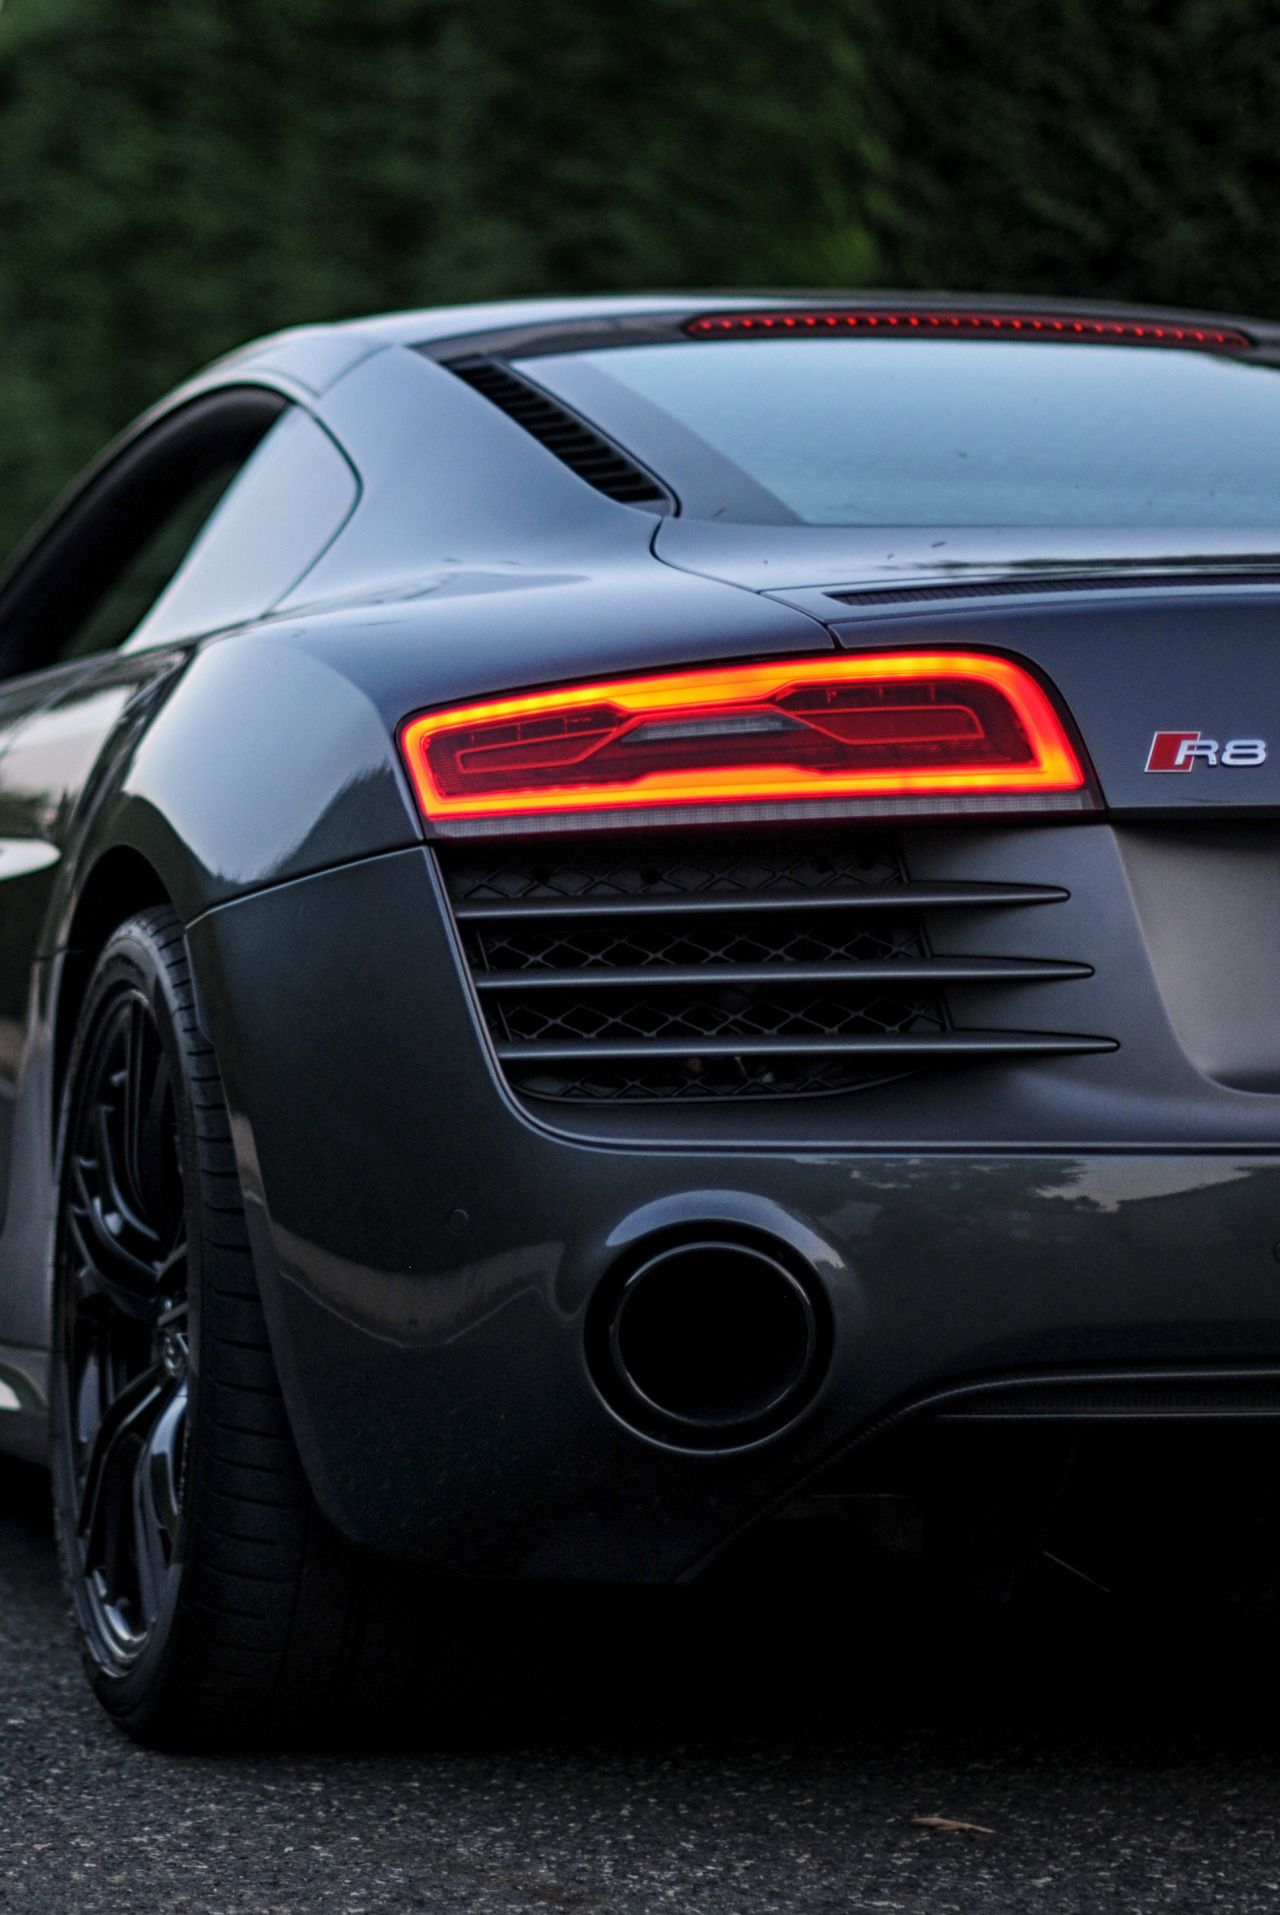 Best Audi R8 Wallpaper For Desktop And Mobile About S3